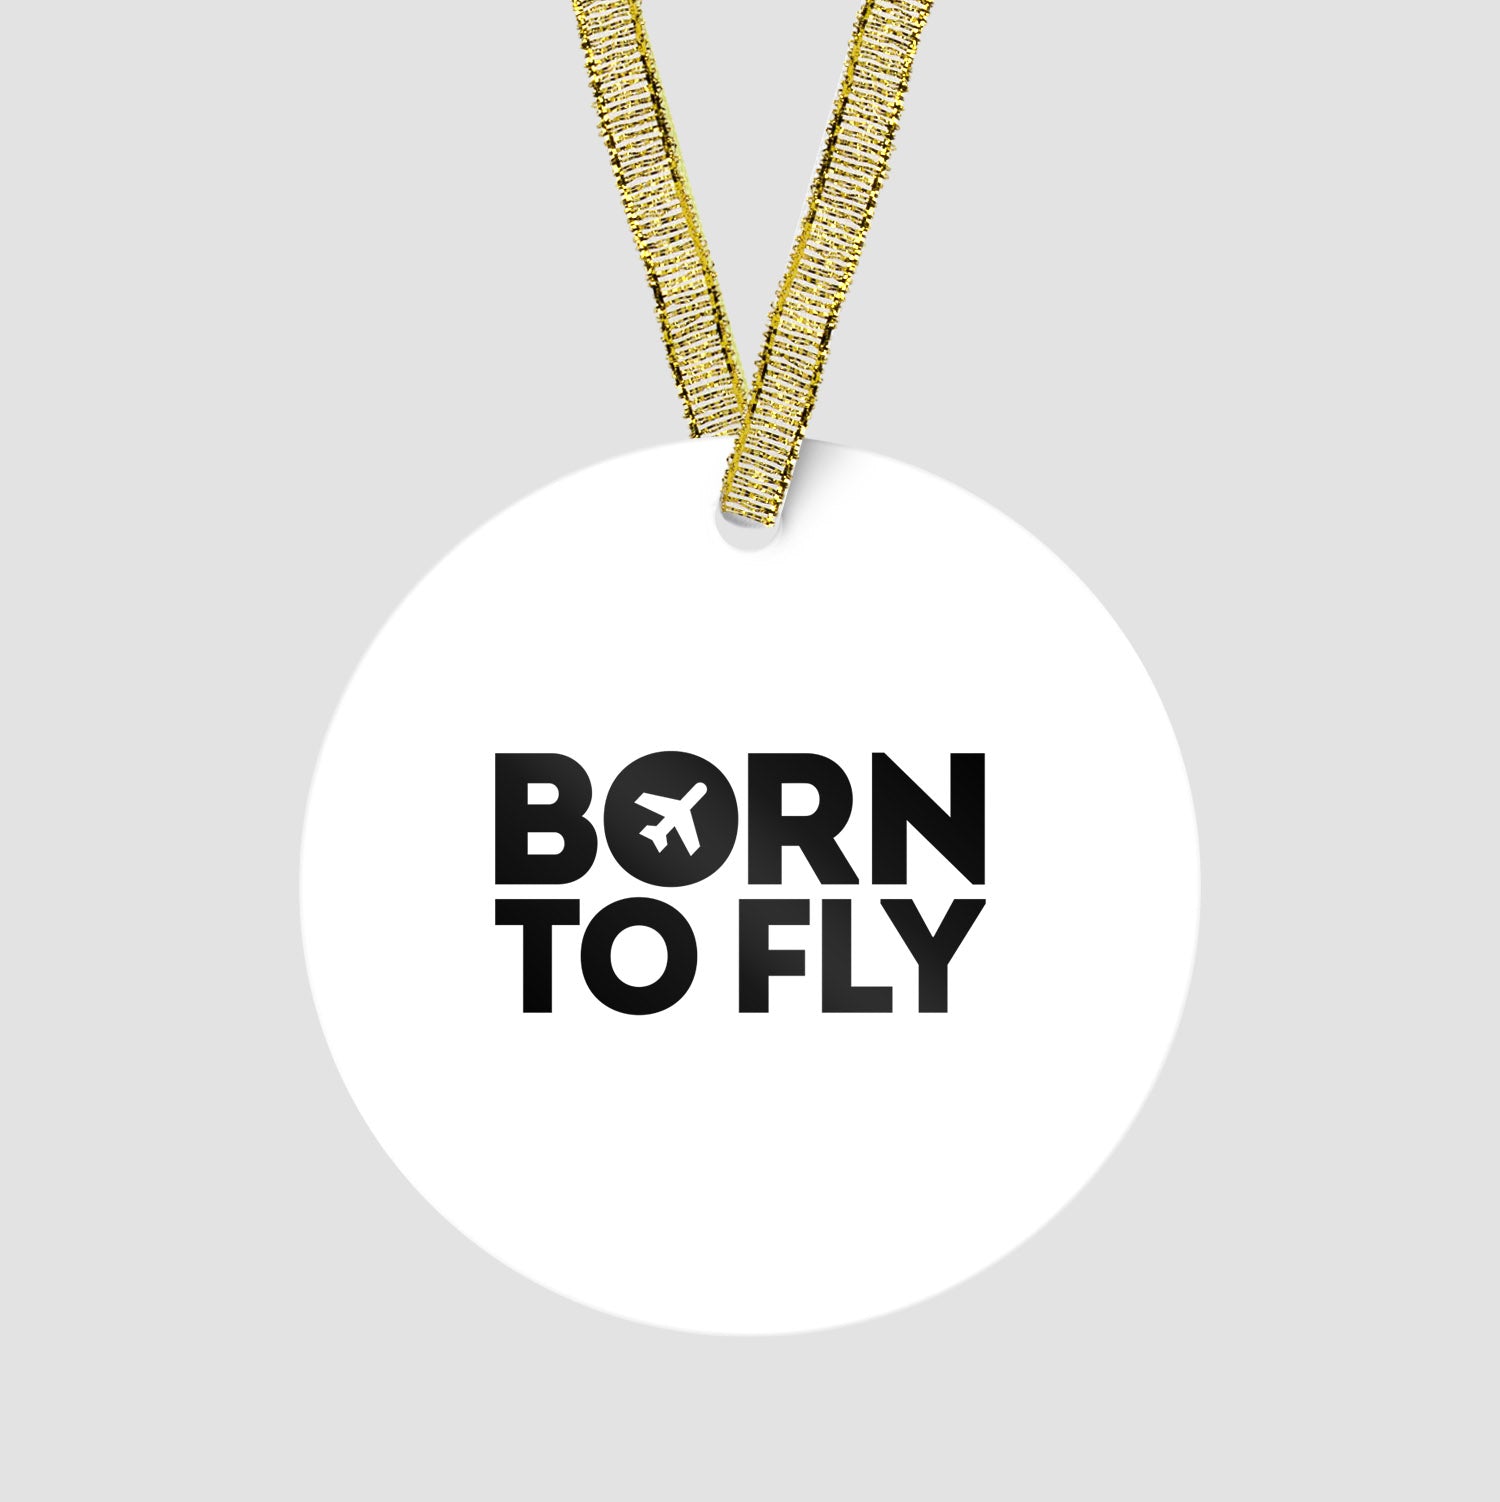 Born To Fly - Ornament - Airportag